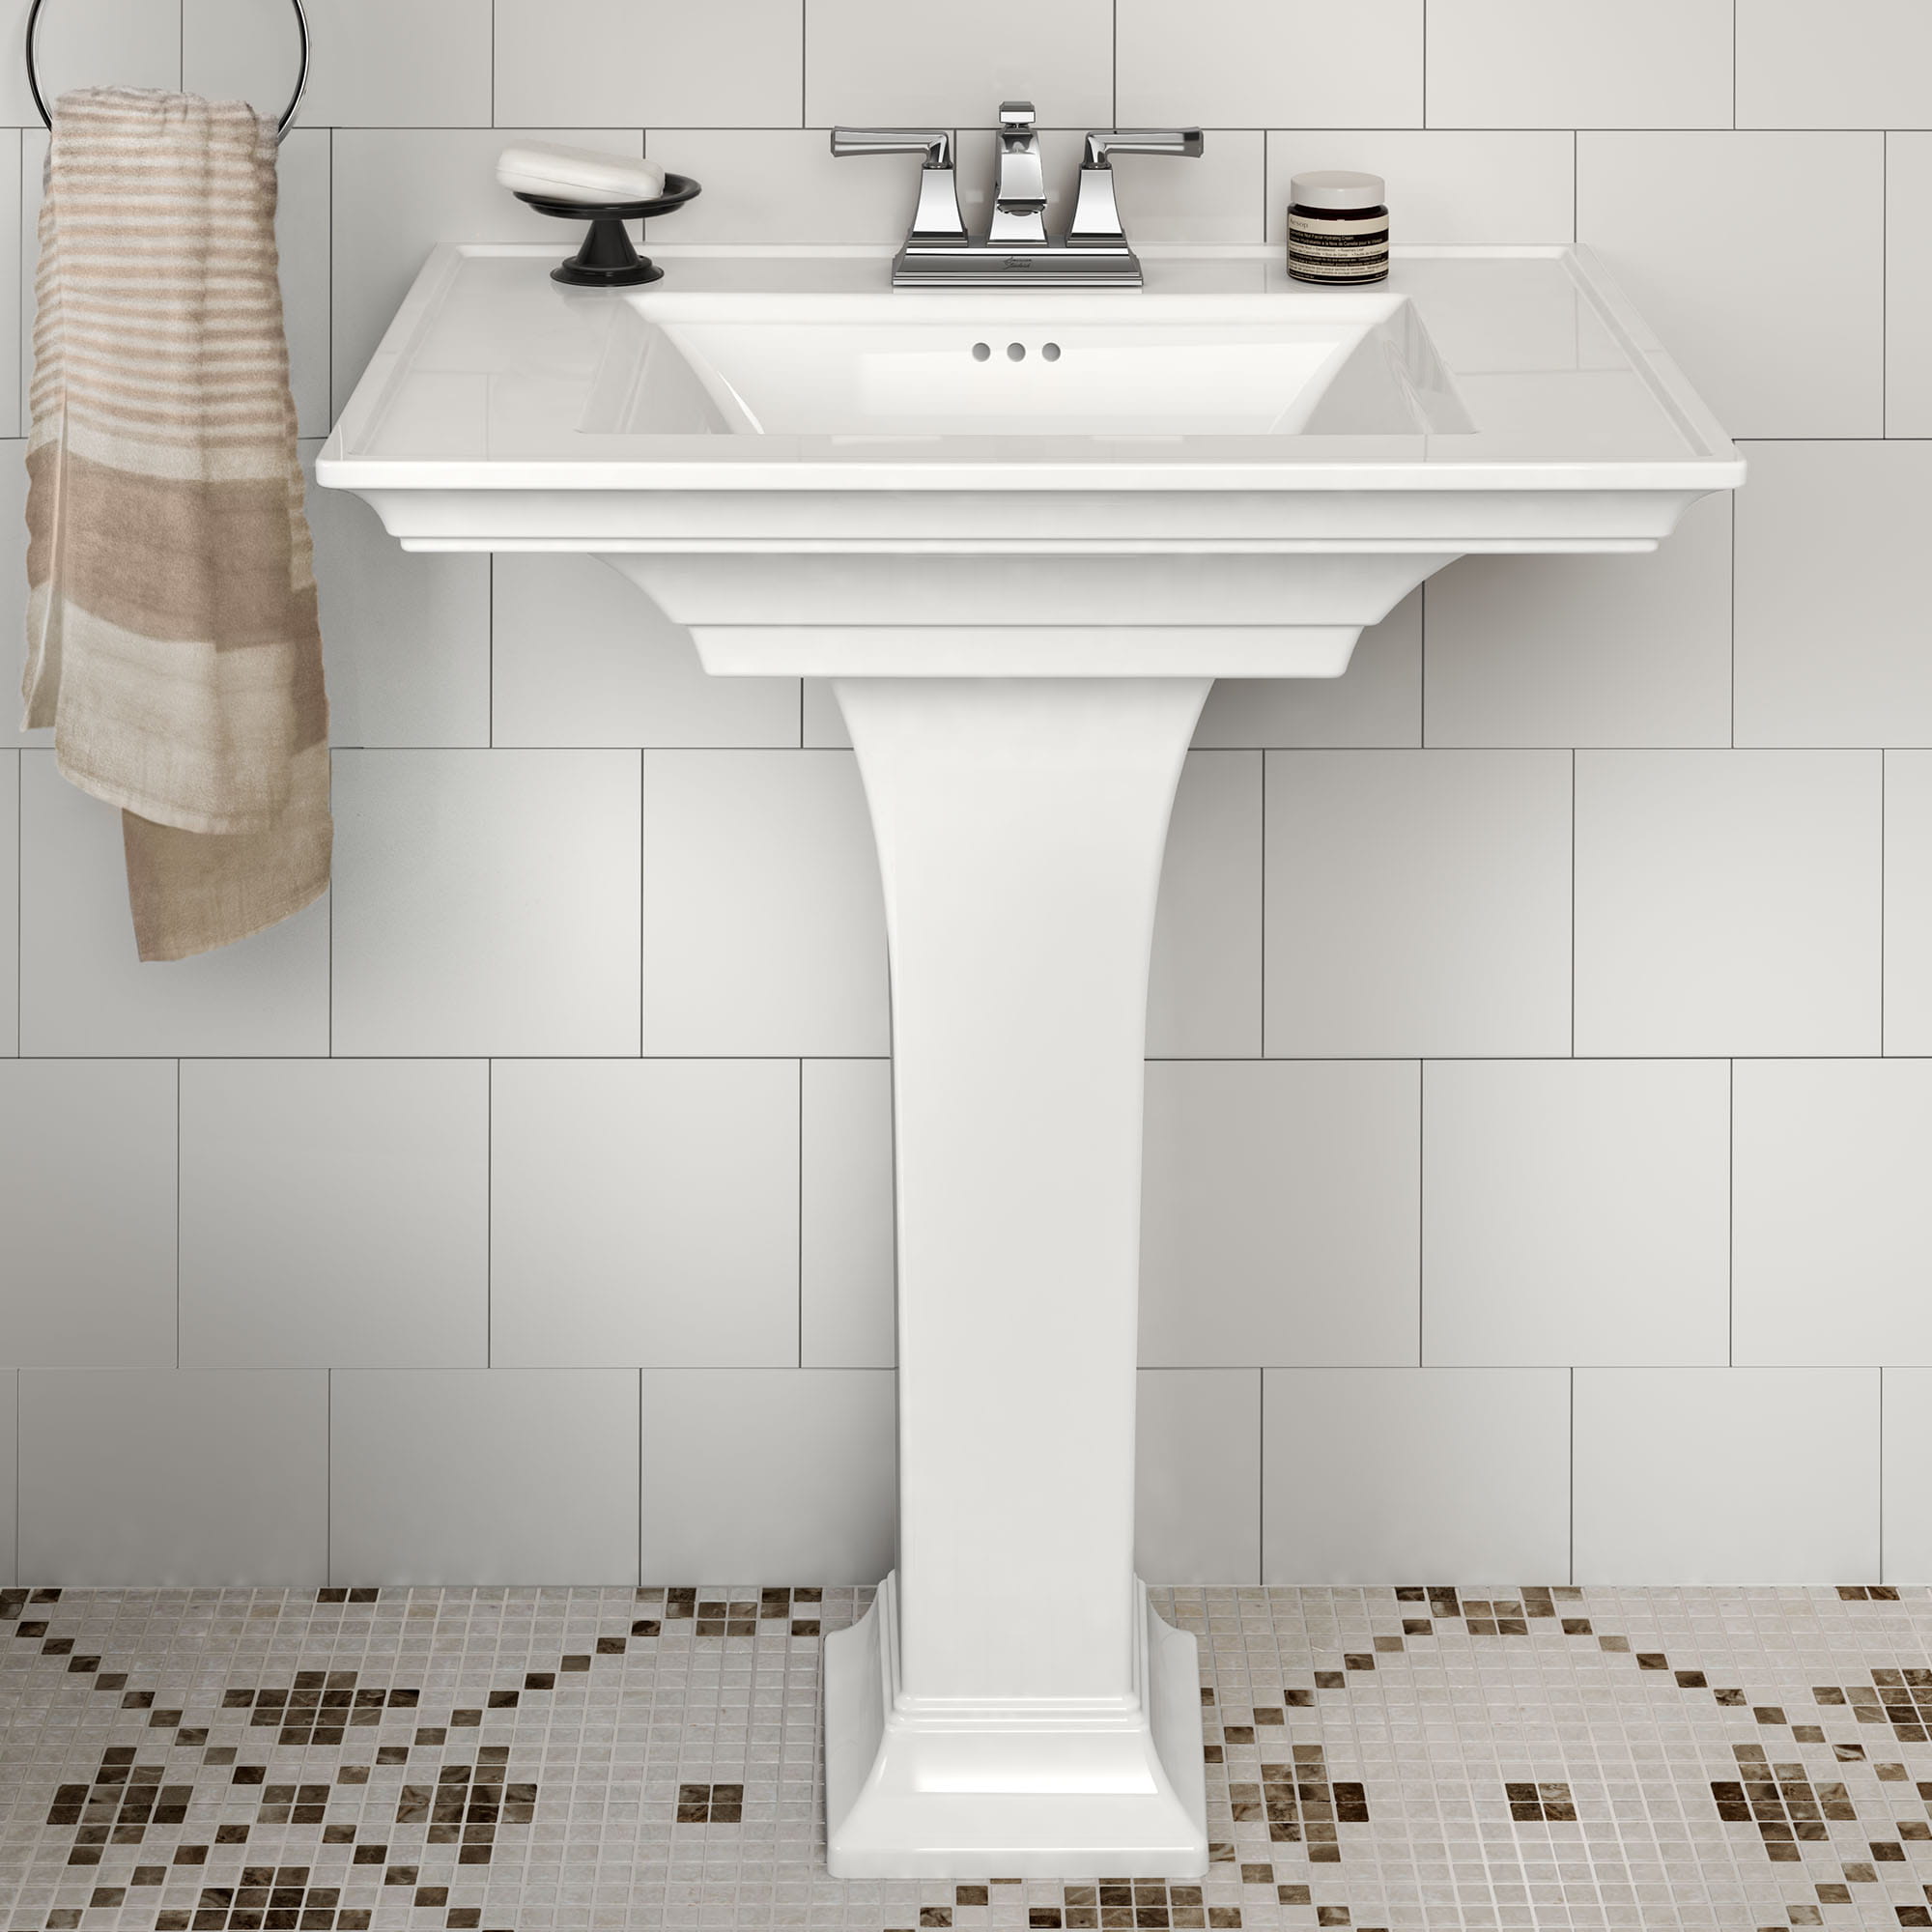 Town Square S 4 Inch Centerset Pedestal Sink Top and Leg Combination WHITE